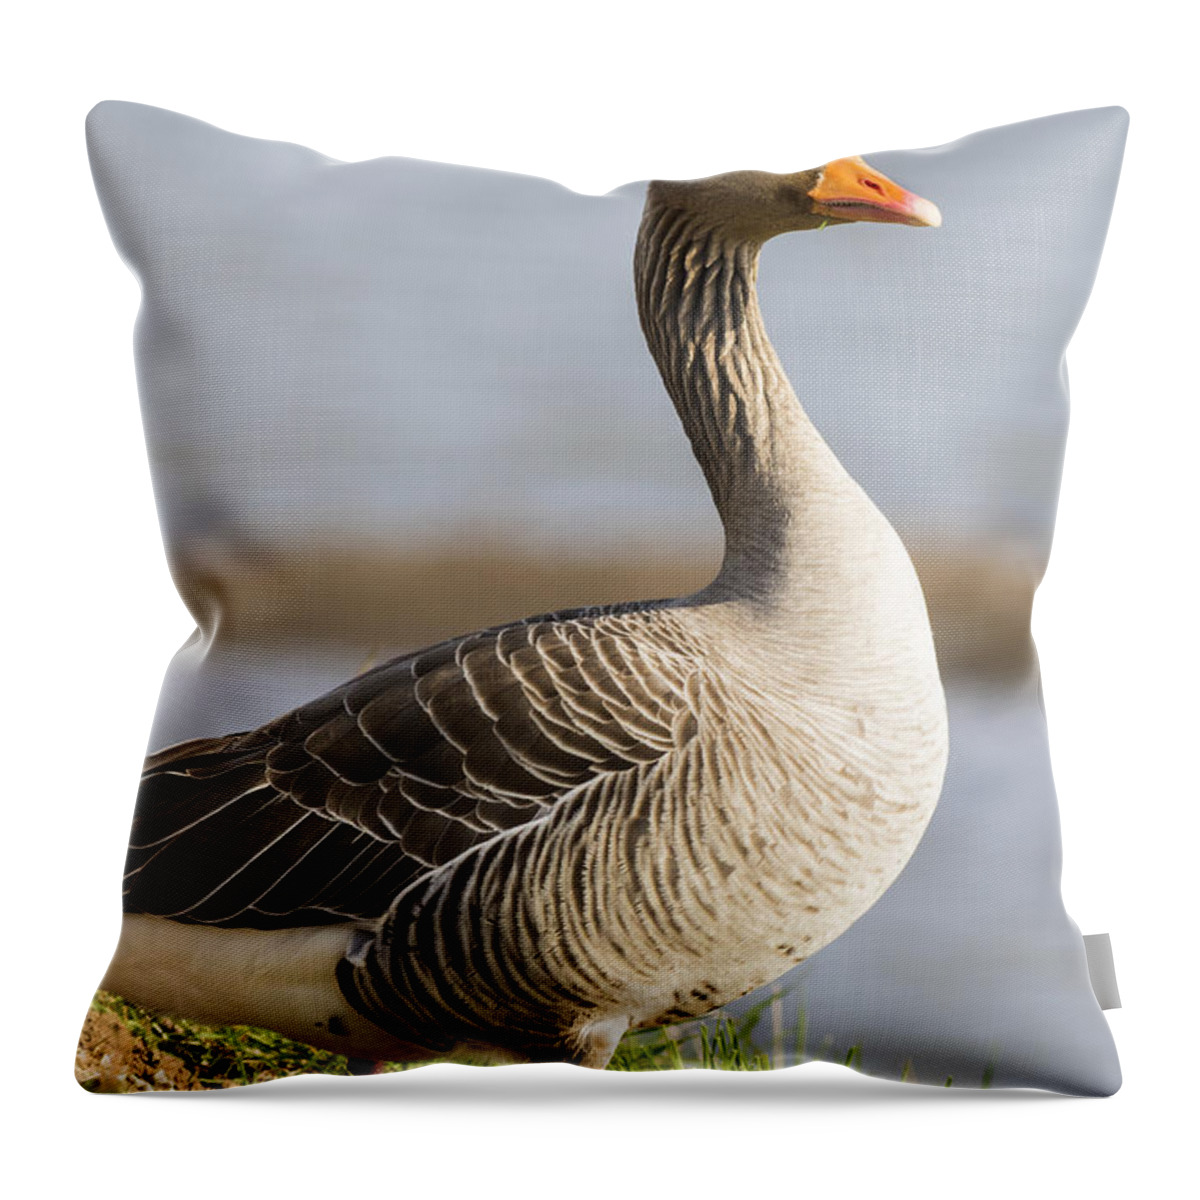 Anser Throw Pillow featuring the photograph Pink footed Goose by Chris Smith